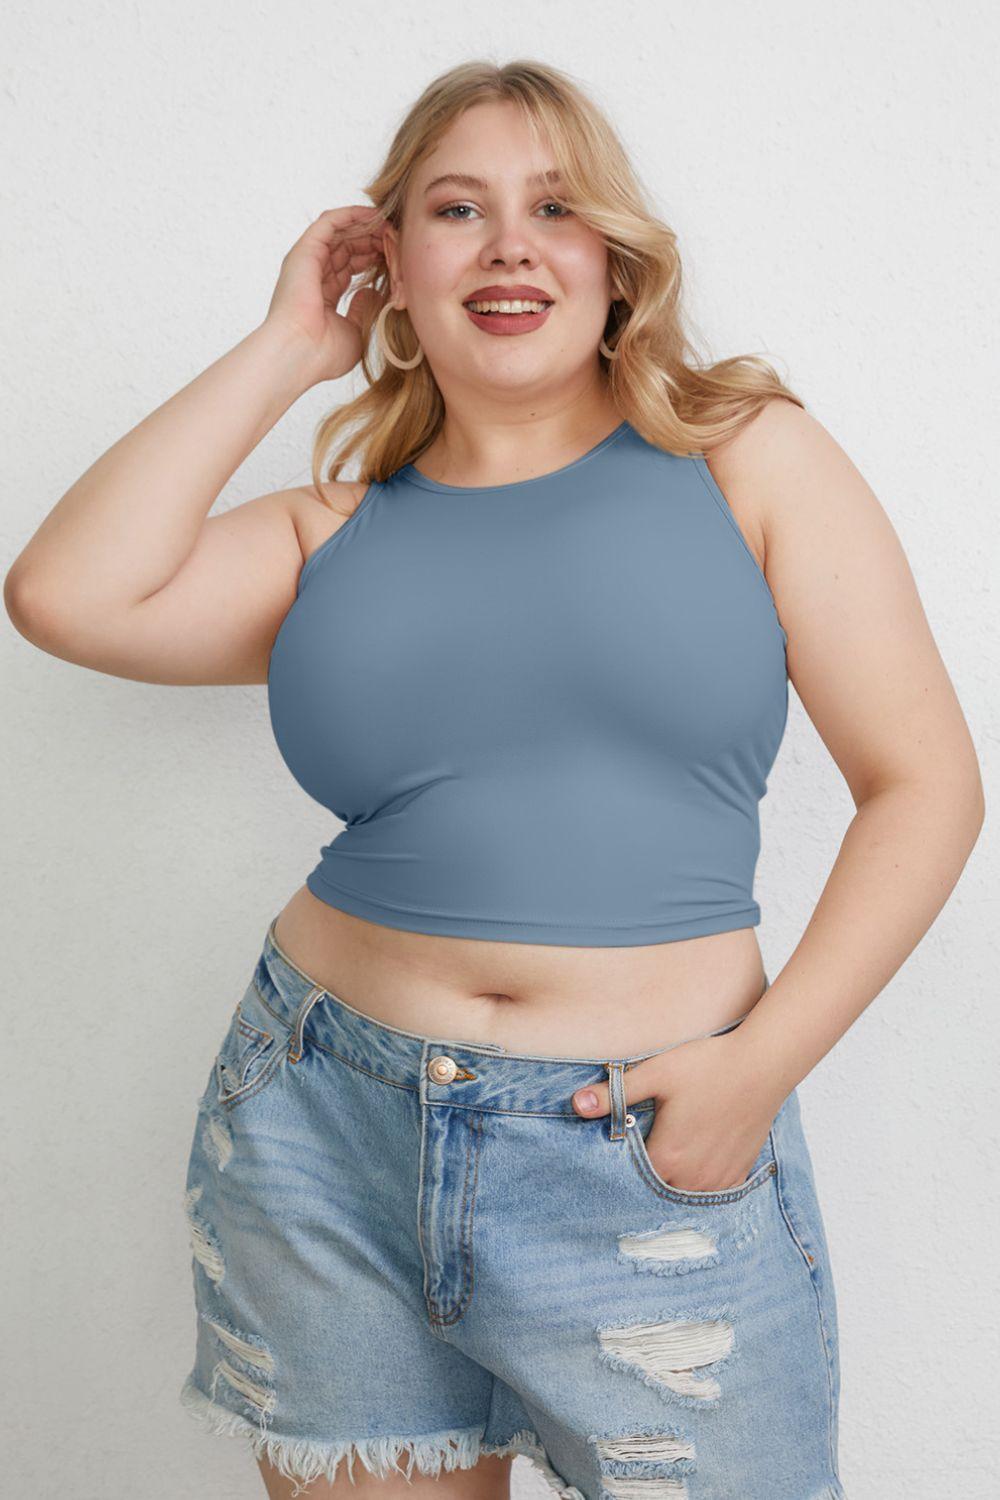 a woman in a blue top posing for a picture